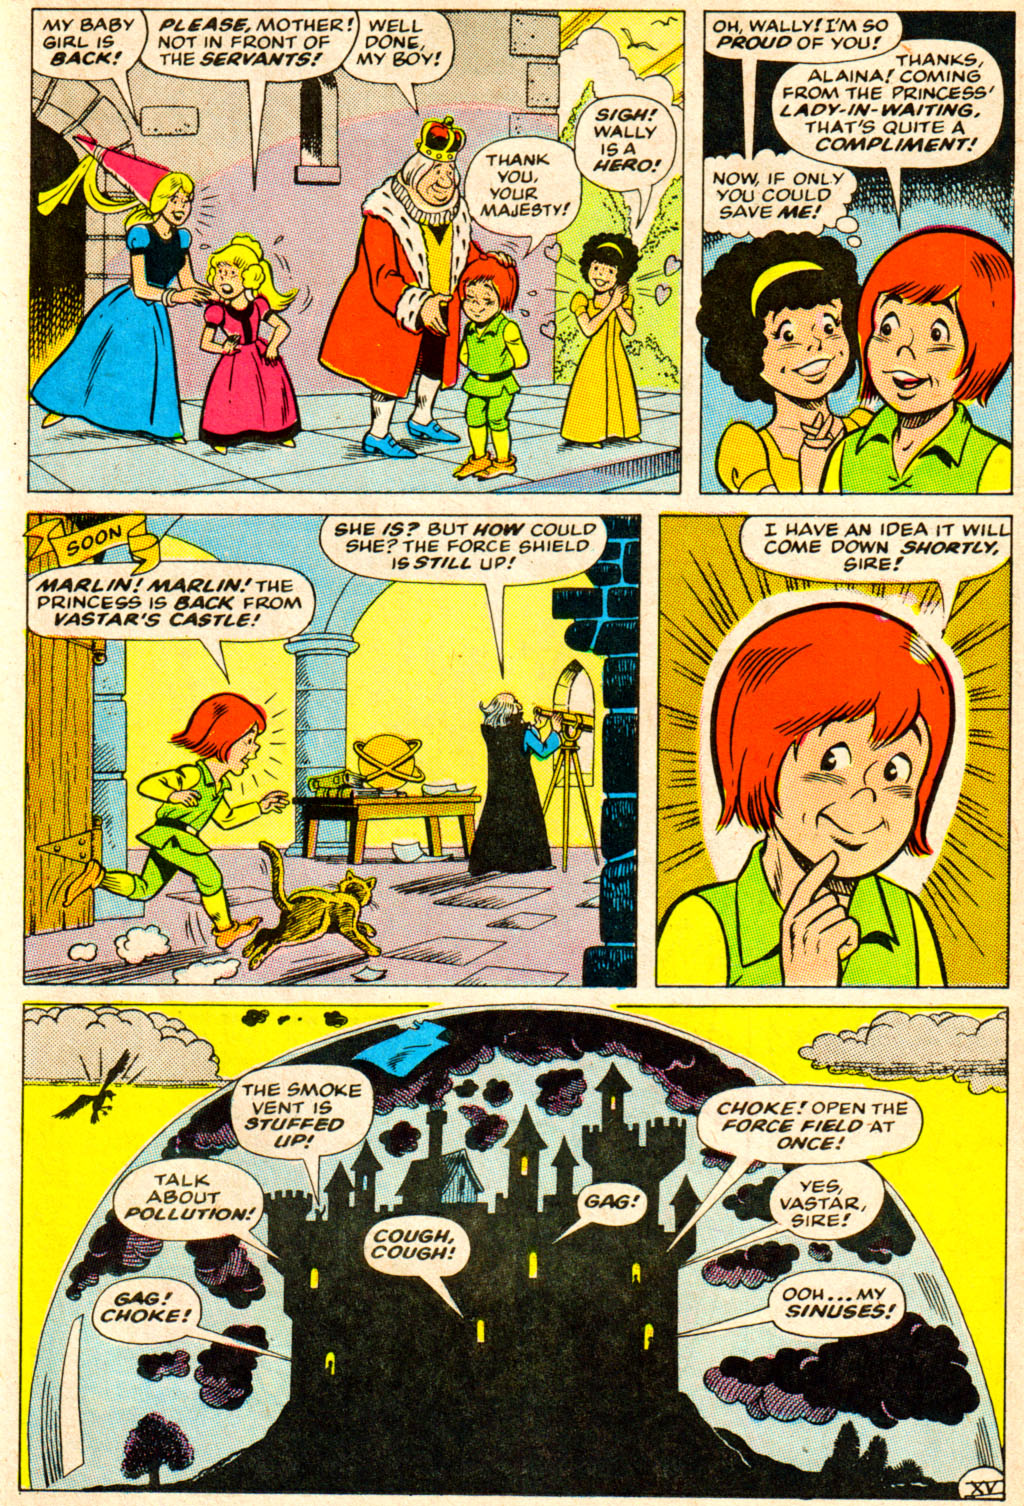 Read online Wally the Wizard comic -  Issue #5 - 16